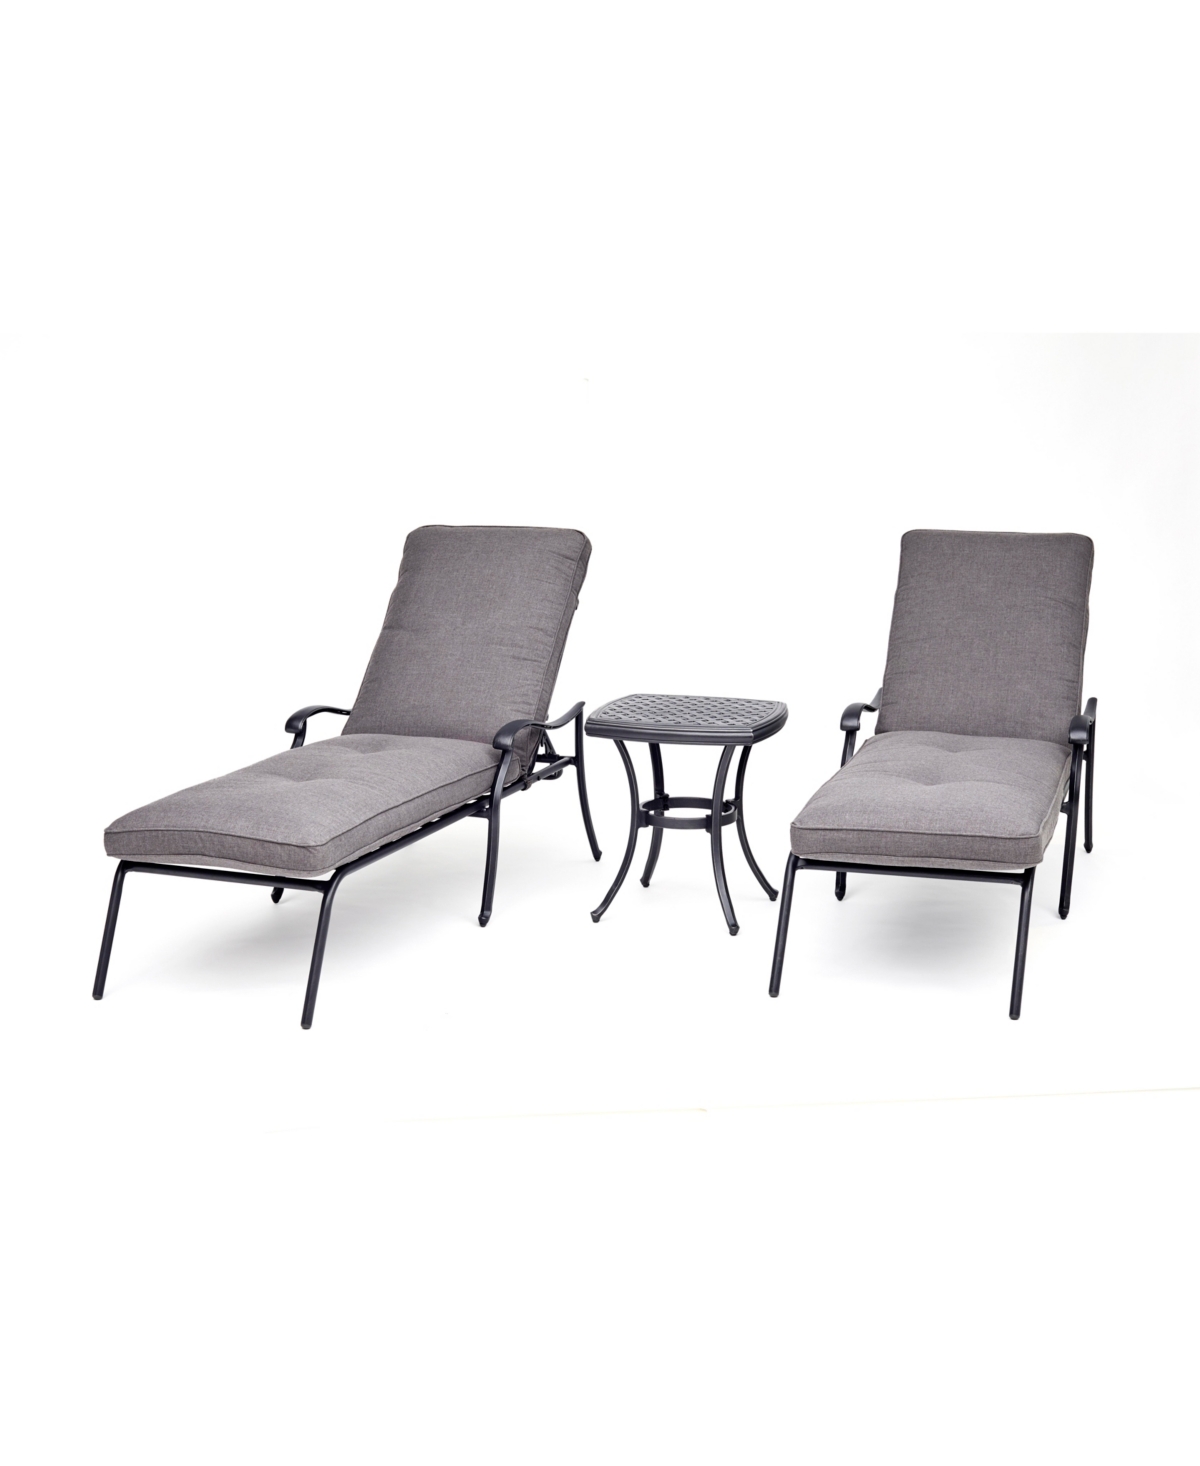 Vintage Ii Outdoor 3-Pc. Chaise Set (2 Chaise Lounges & 1 End Table) With Outdura Cushions, Created for Macys